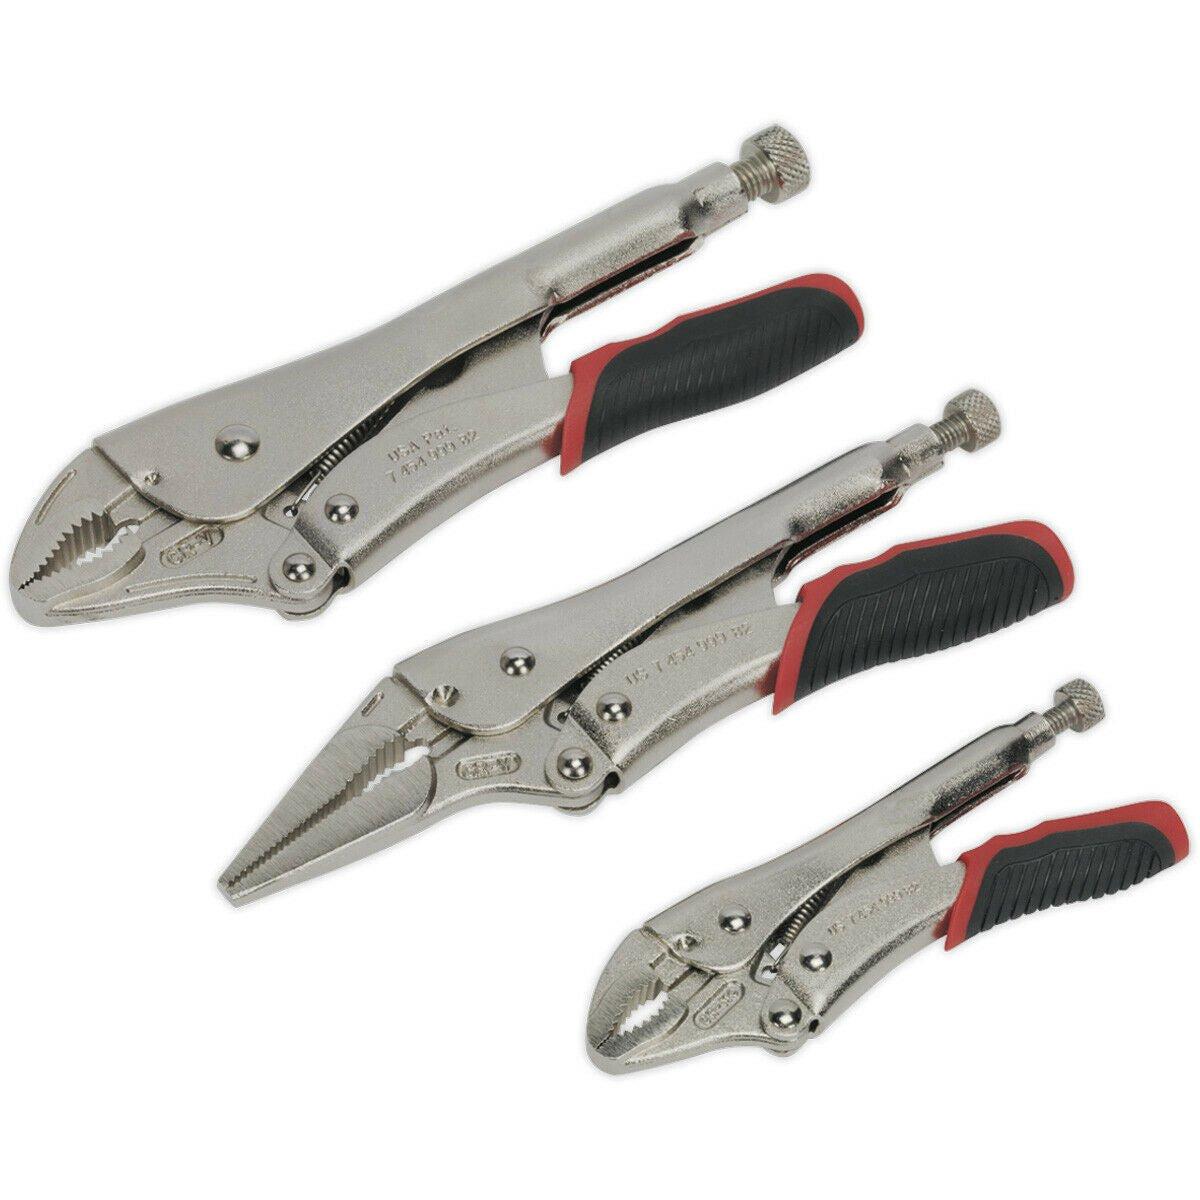 3 Piece Quick Release Locking Pliers Set - Curved and Long Nose Pliers - Steel